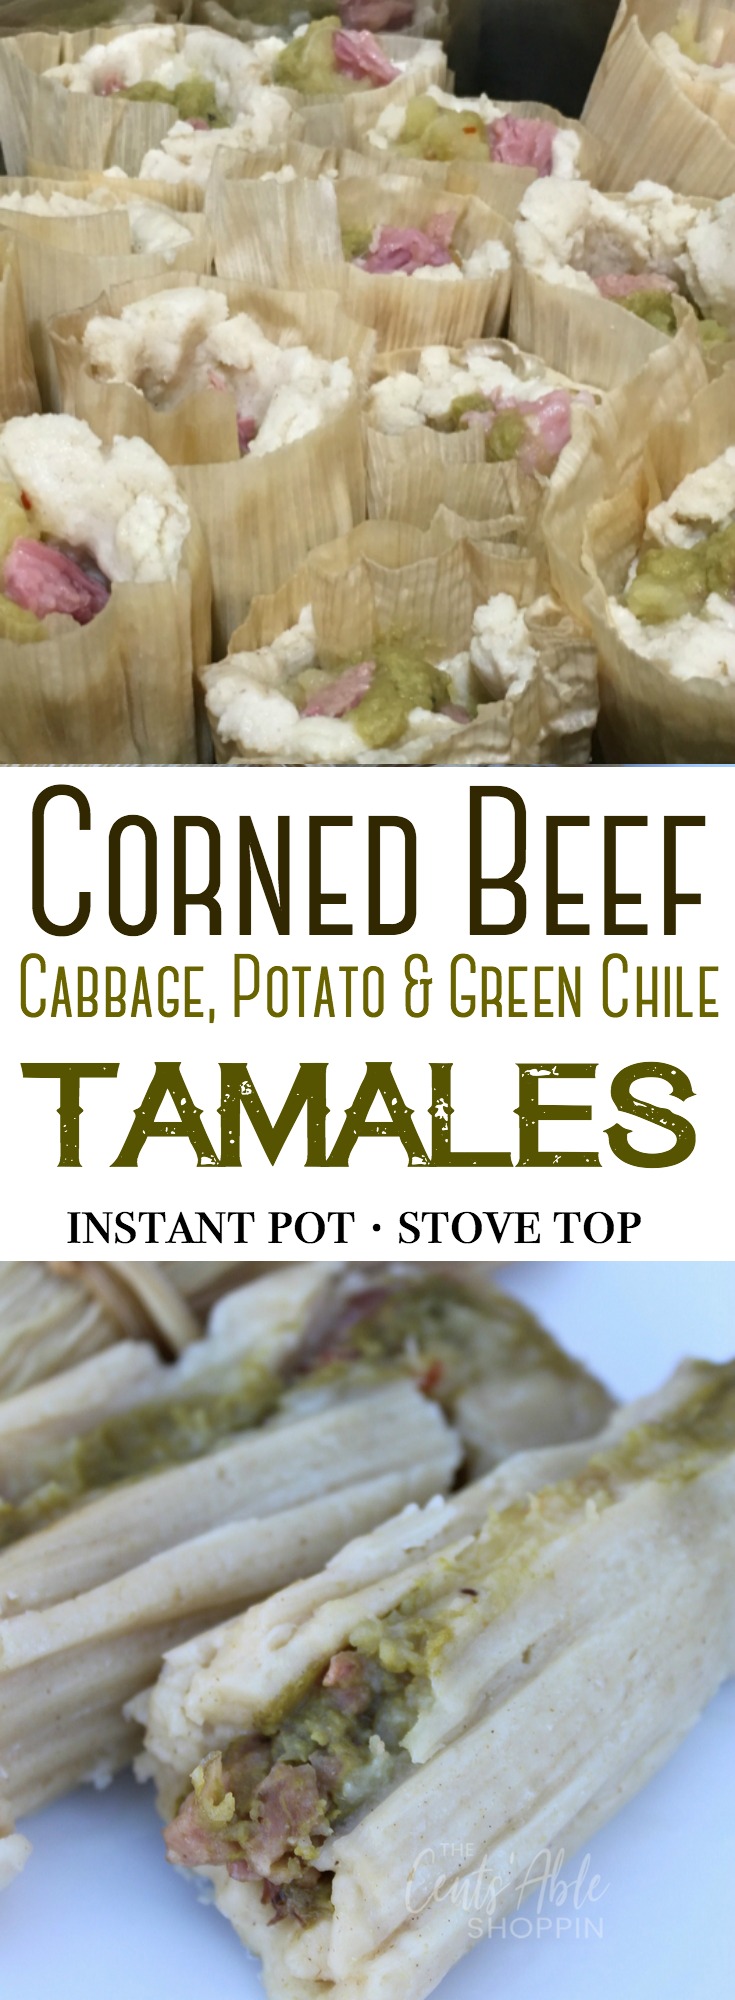 The best Irish Tamales loaded with corned beef, cabbage and potatoes - the perfect way to enjoy your St. Patrick's Day leftovers! #Irish #Tamales #CornedBeef #Mexican #StPatricksDay #InstantPot #PressureCooker